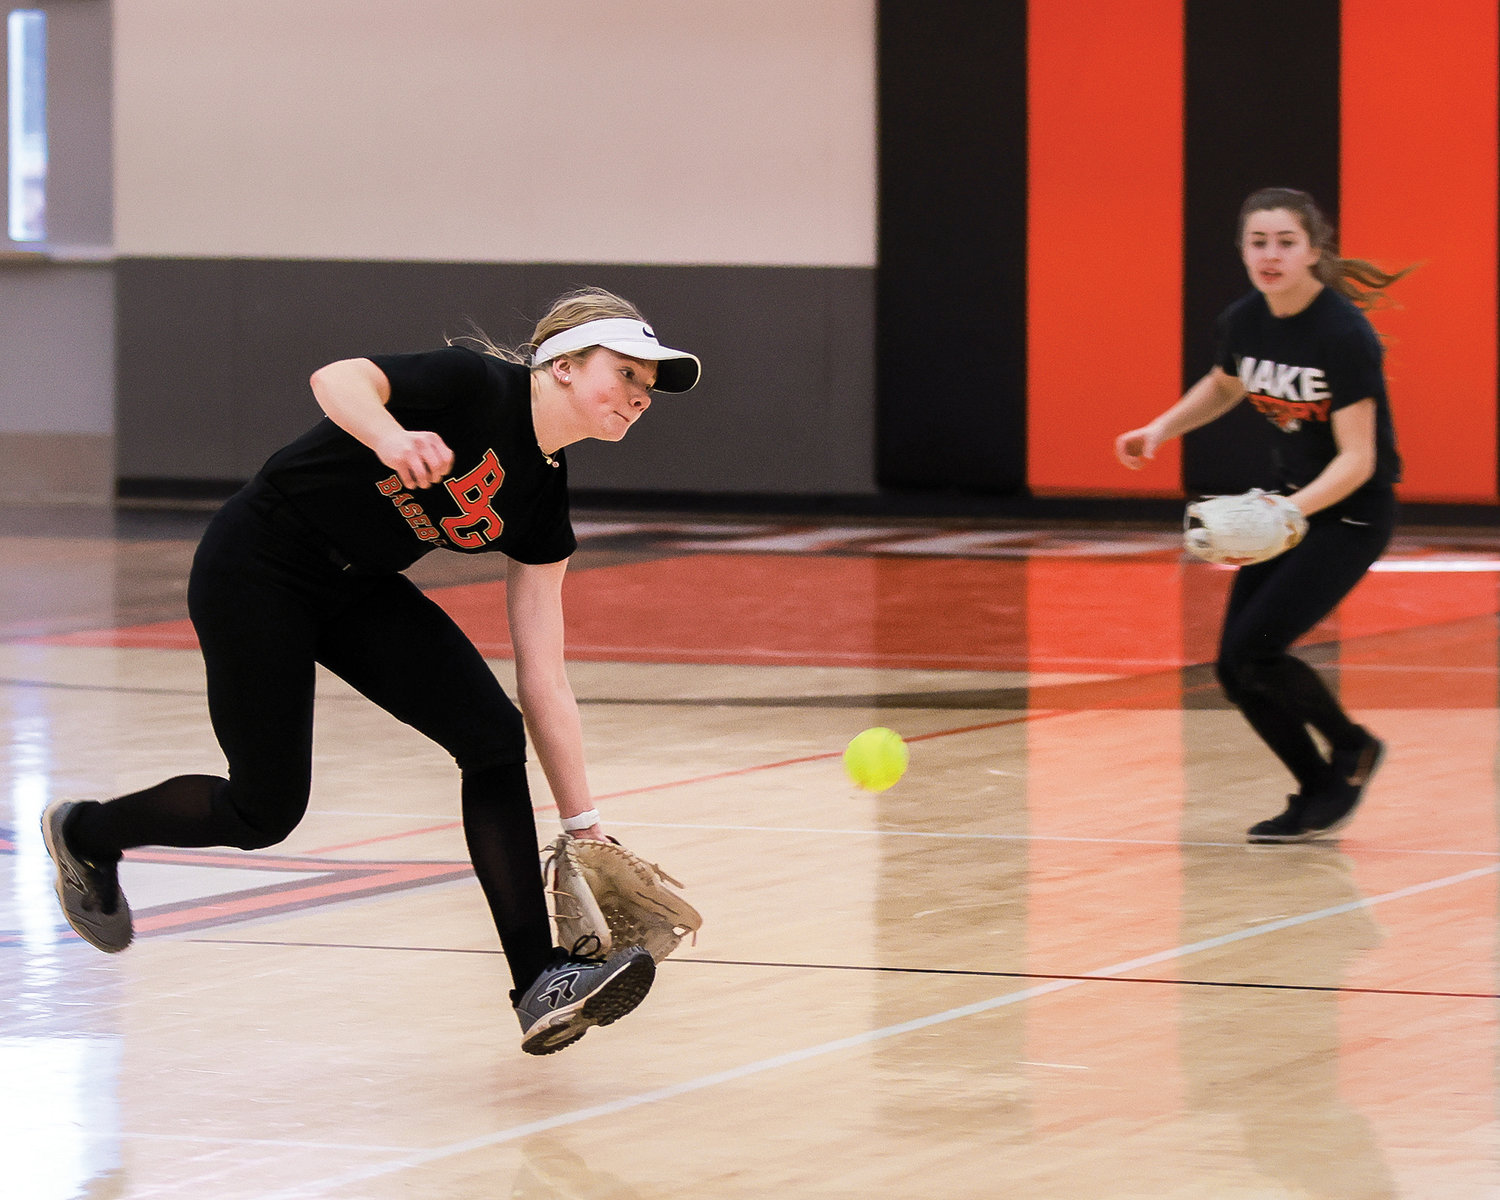 Hailey Ferguson fields a ball, left, while Lorelei Brown moves to backup a possible pass ball, right, during indoor defense drills at Battle Ground High School due to field conditions on Tuesday, March 7.